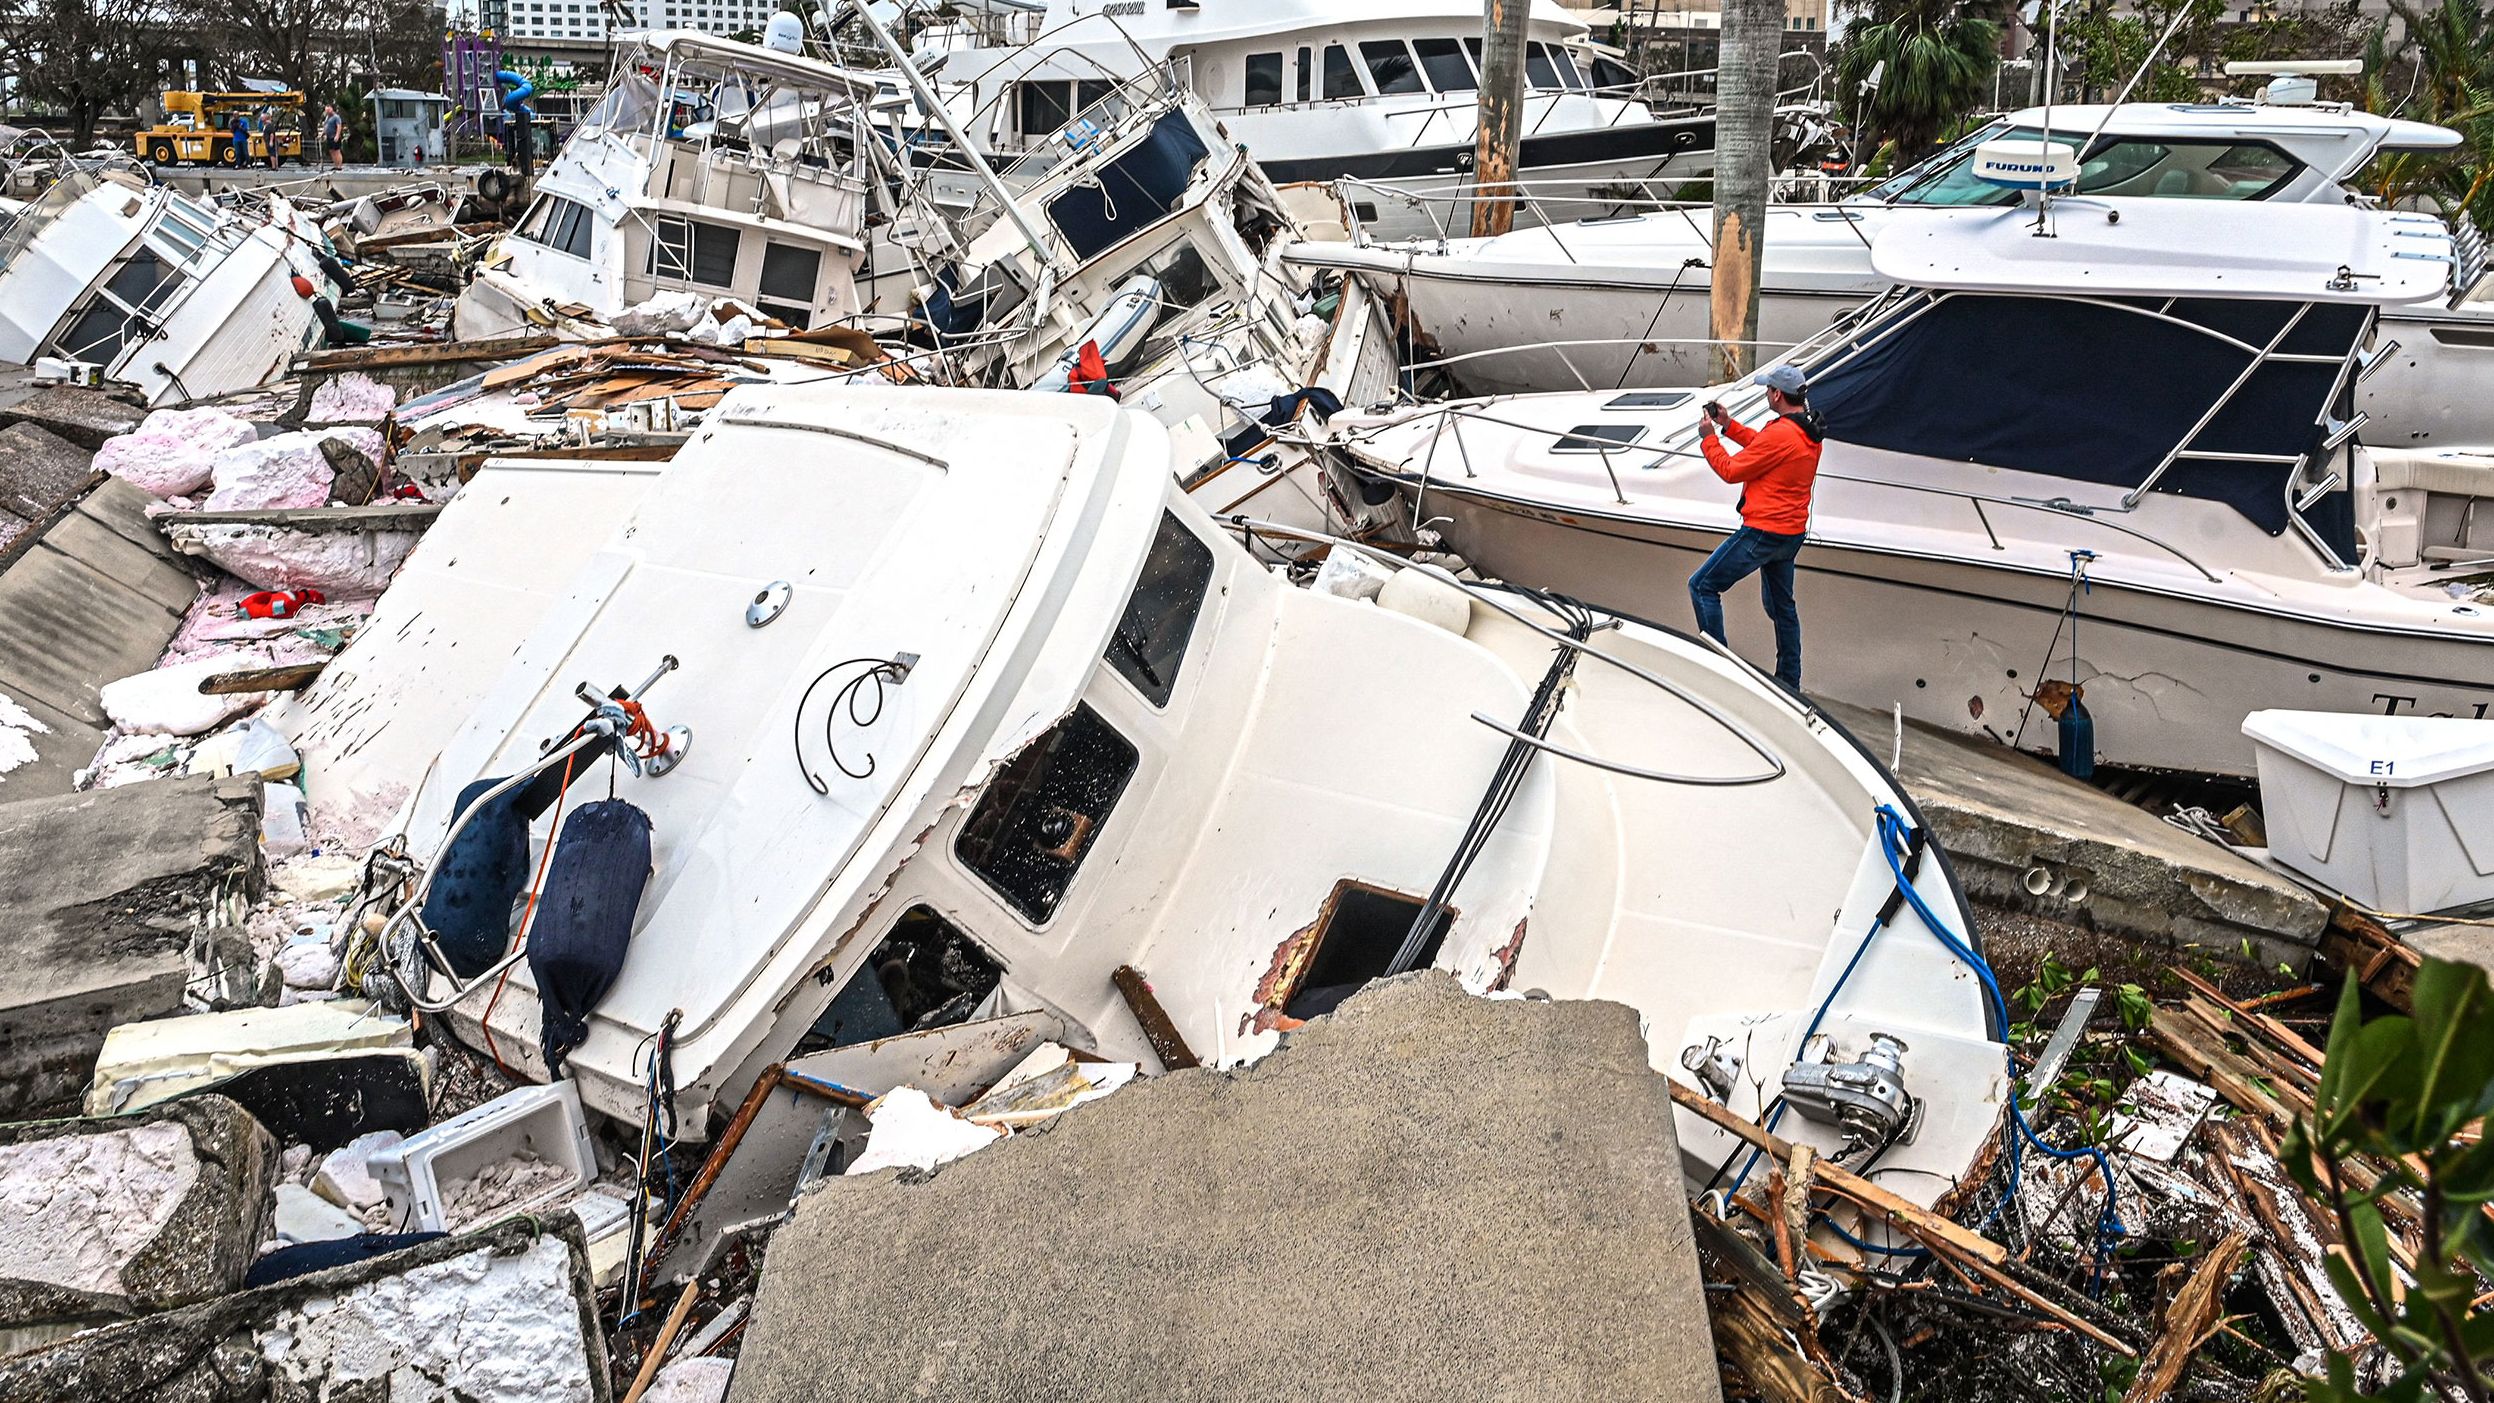 A man takes photos Thursday, September 29, of boats that were damaged by Hurricane Ian in Fort Myers, Florida.